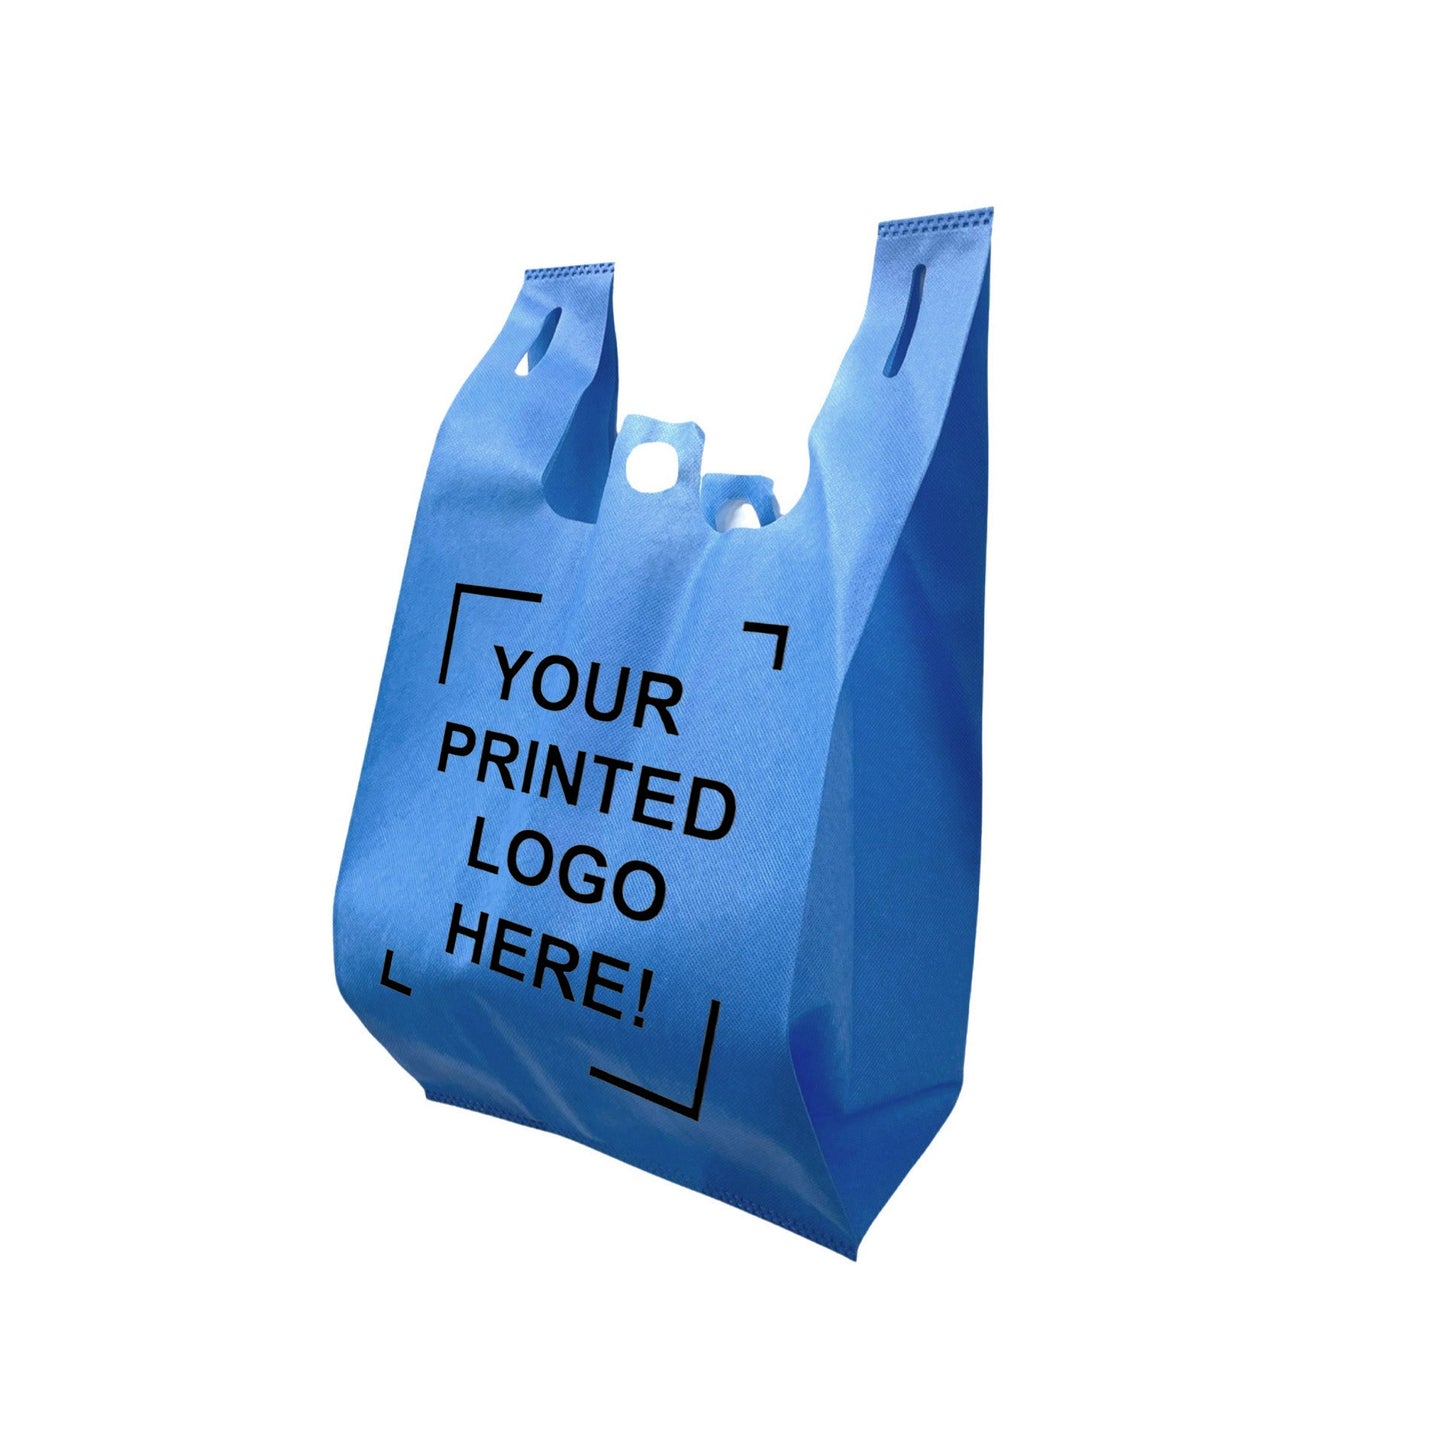 200pcs, Non-Woven Reusable T-Shirt Bag 11x7x20 inches Blue Shopping Bags Pinch Bottom, One Color Custom Print, Printed in Canada